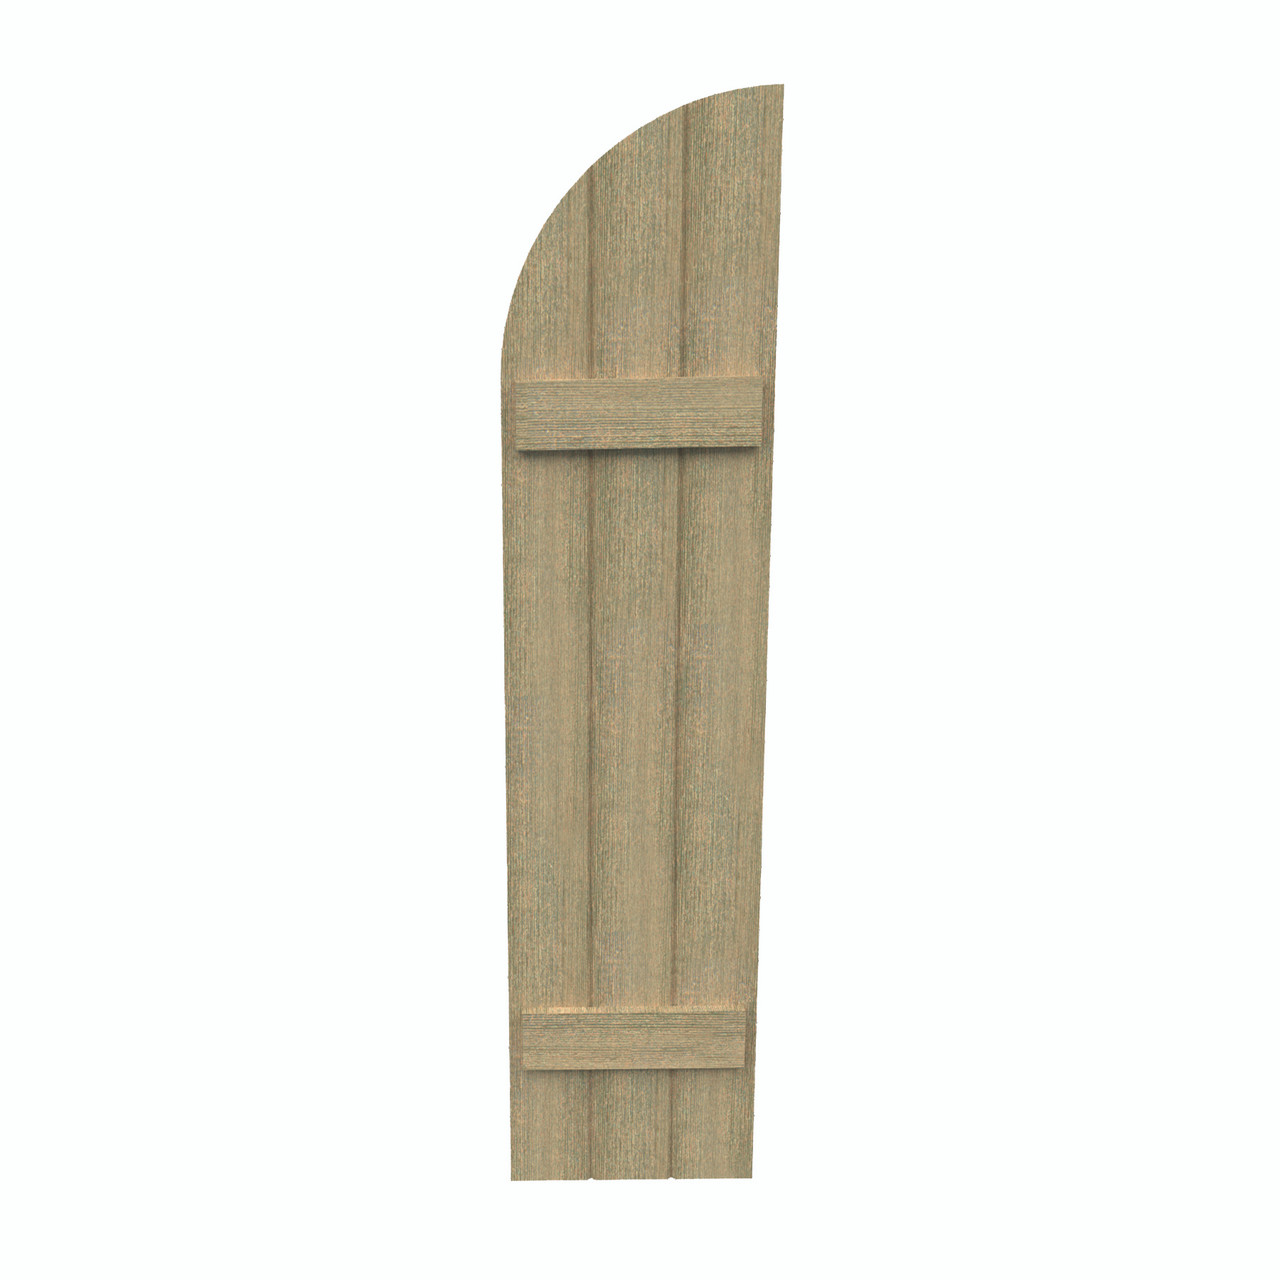 14 inch by 97 inch Quarter Round Shutter with 3-Boards